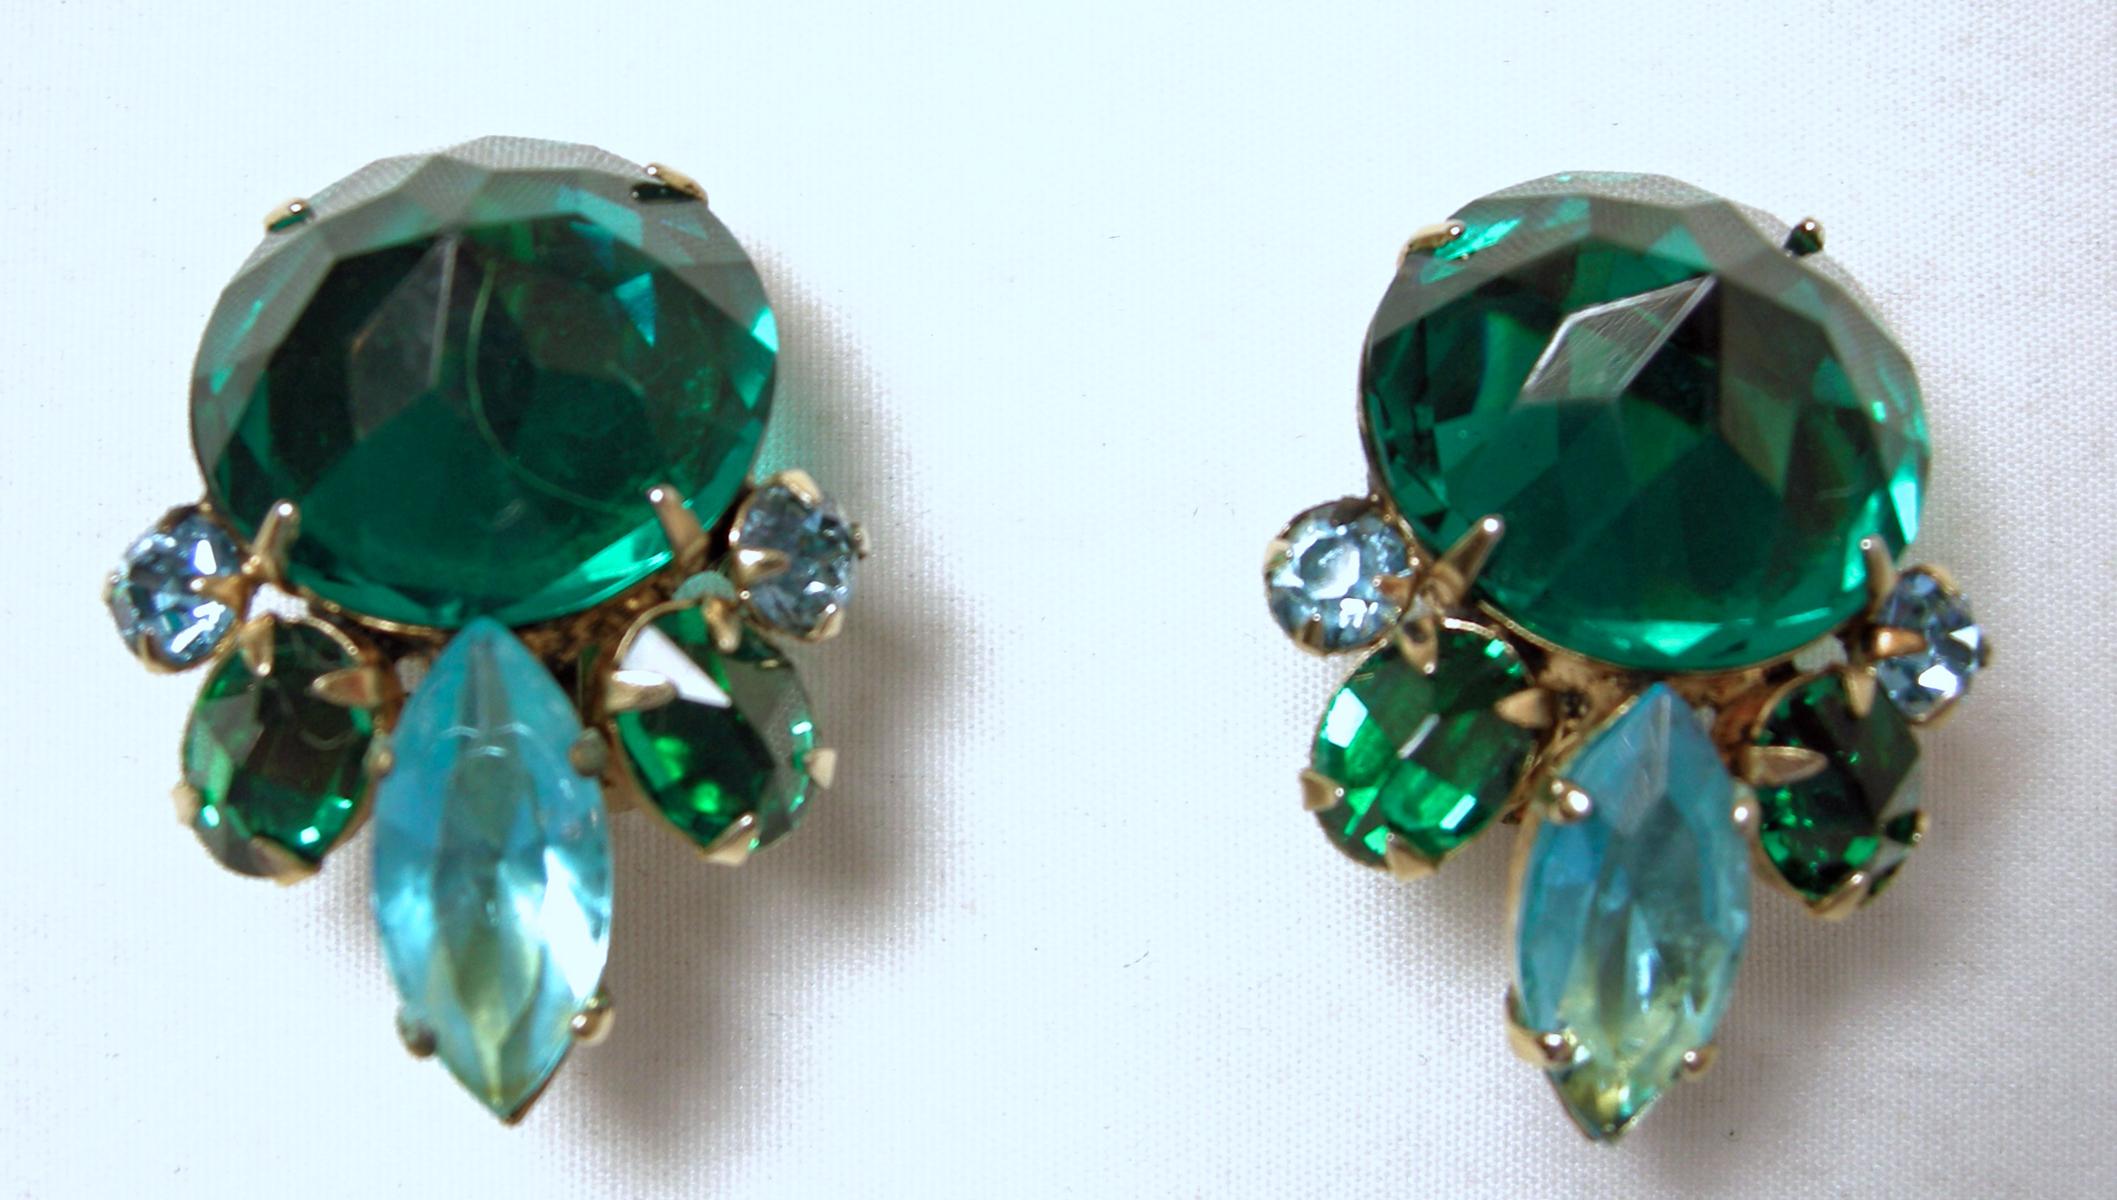 It’s so rare to find a Schreiner set, but here we have a stunning brooch and earrings with green crystals and hues of blue/green crystals in a gold tone setting.  The brooch measures 2-1/2” in diameter/across.  The matching clip earrings are 1-1/4”